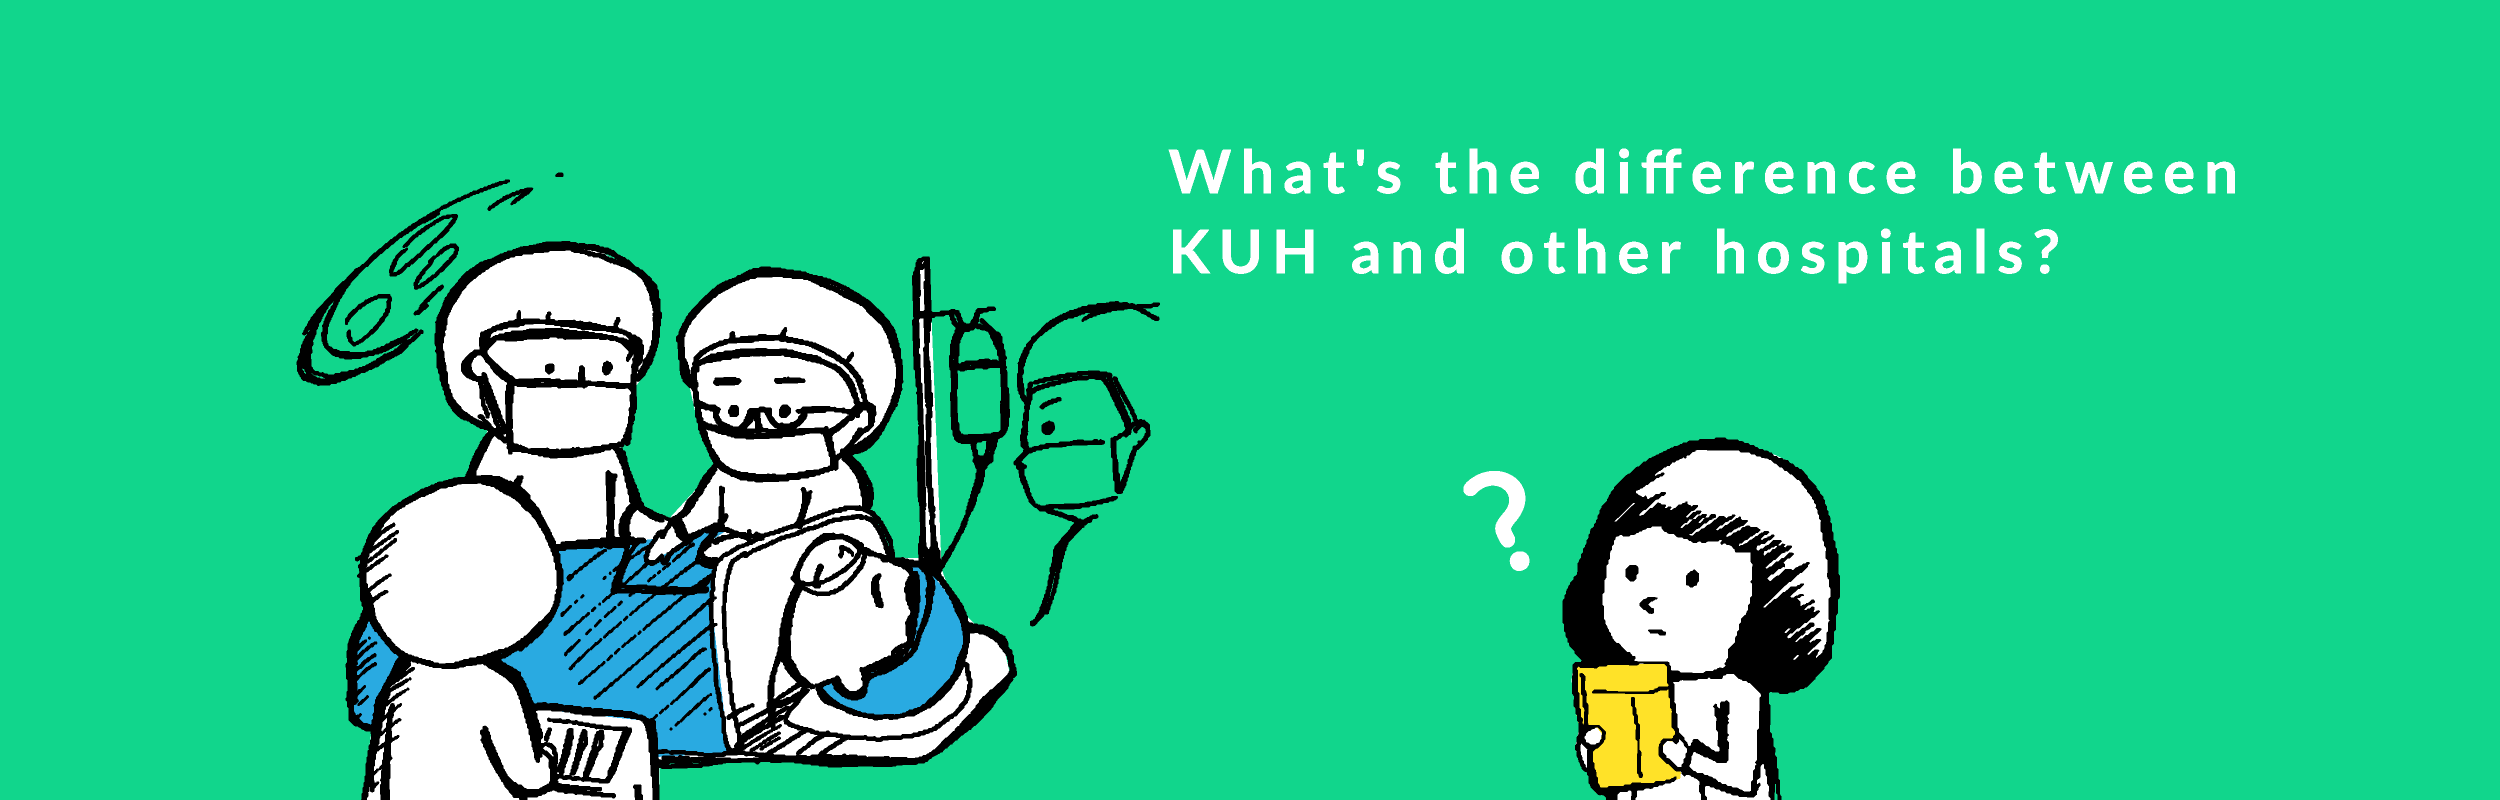 What's the difference between KUH and other hospitals?